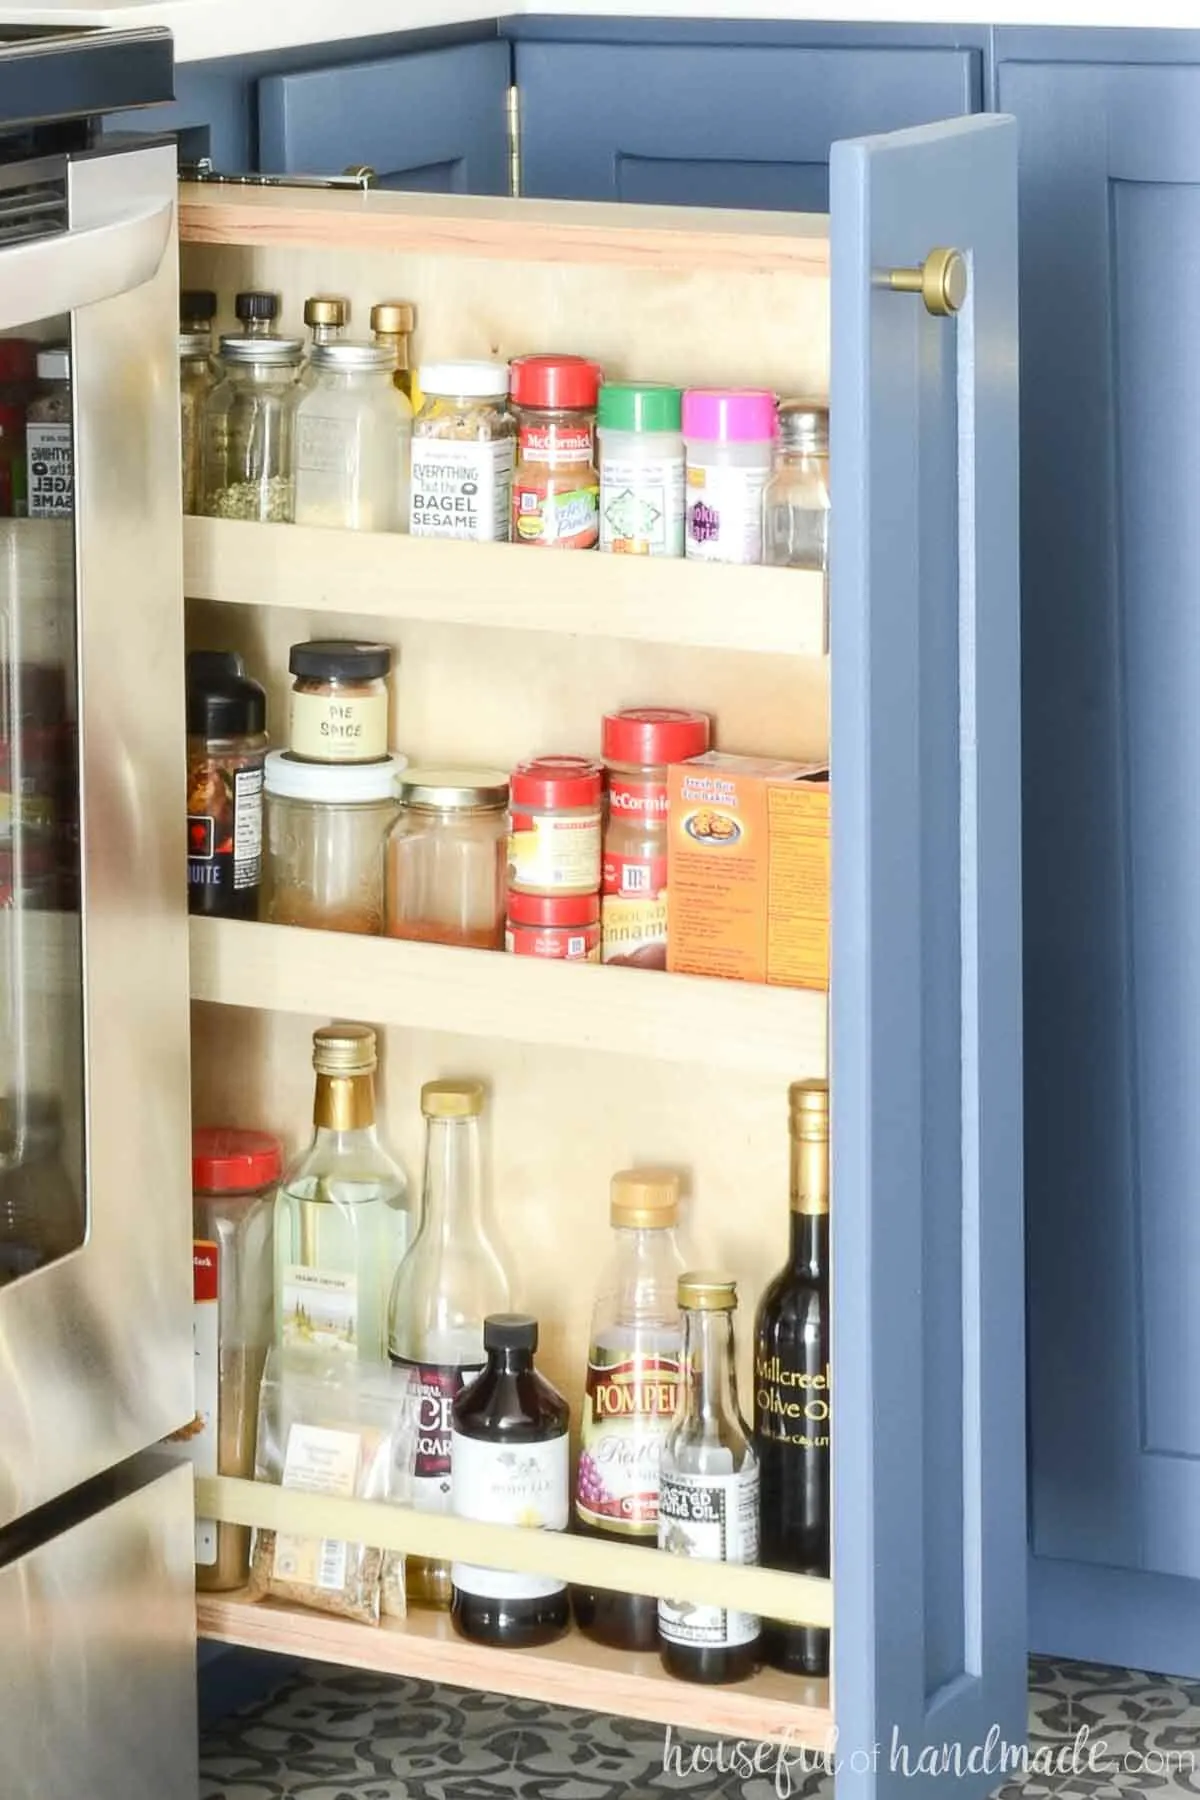 How to Build a Pull Out Spice Rack Cabinet - Houseful of Handmade